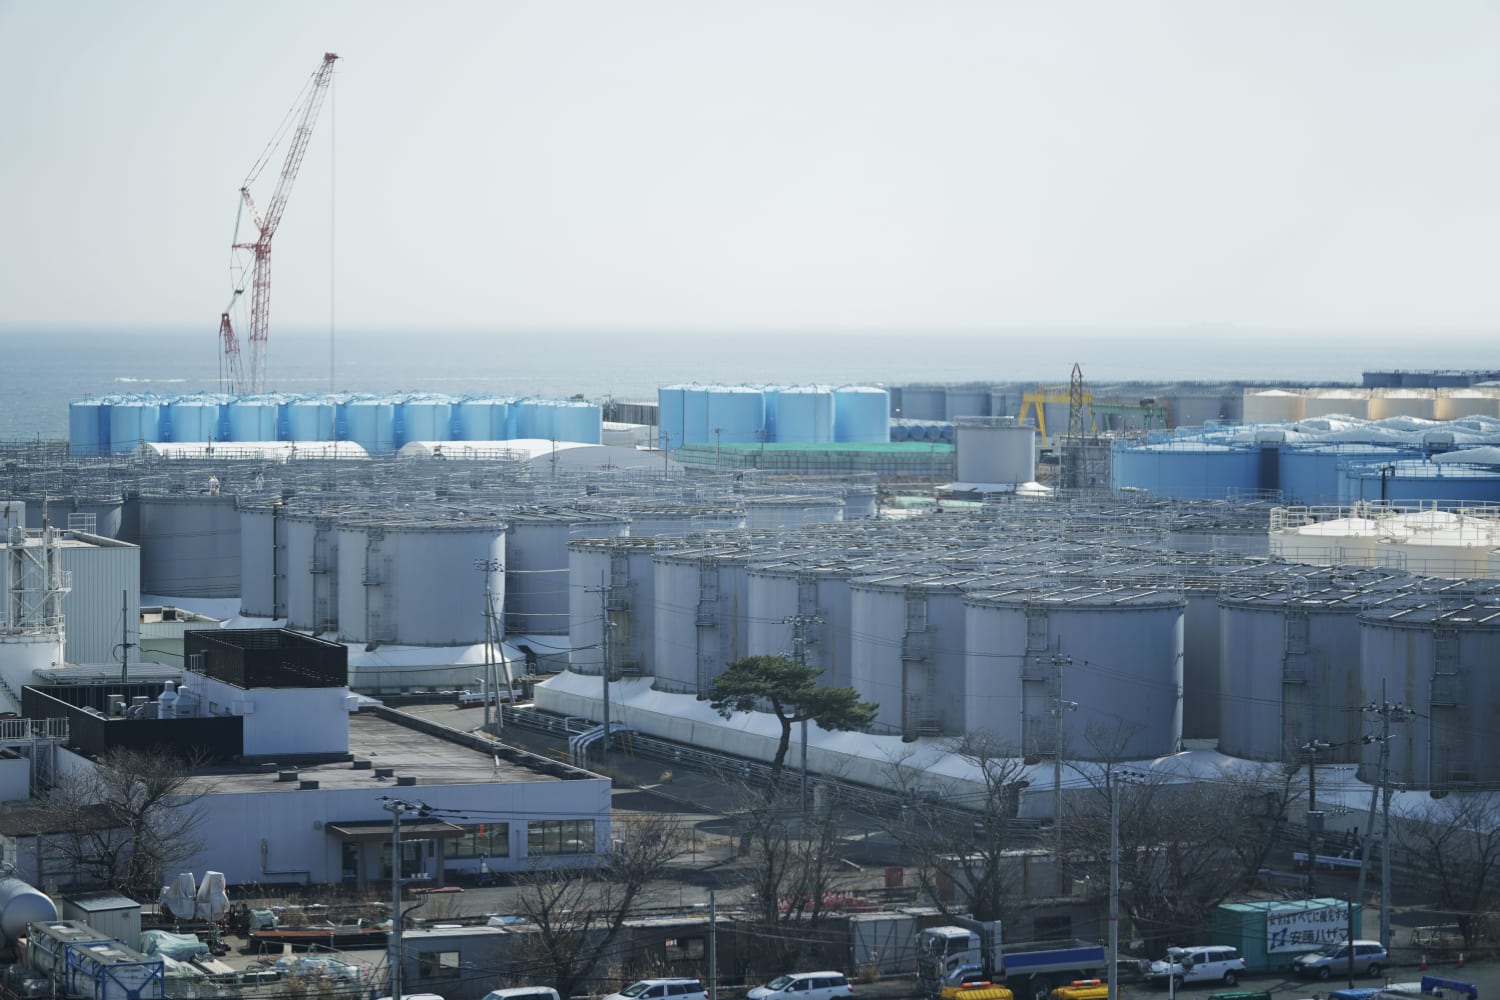 Former Tepco executives ordered to pay $95 billion in damages over Fukushima nuclear disaster